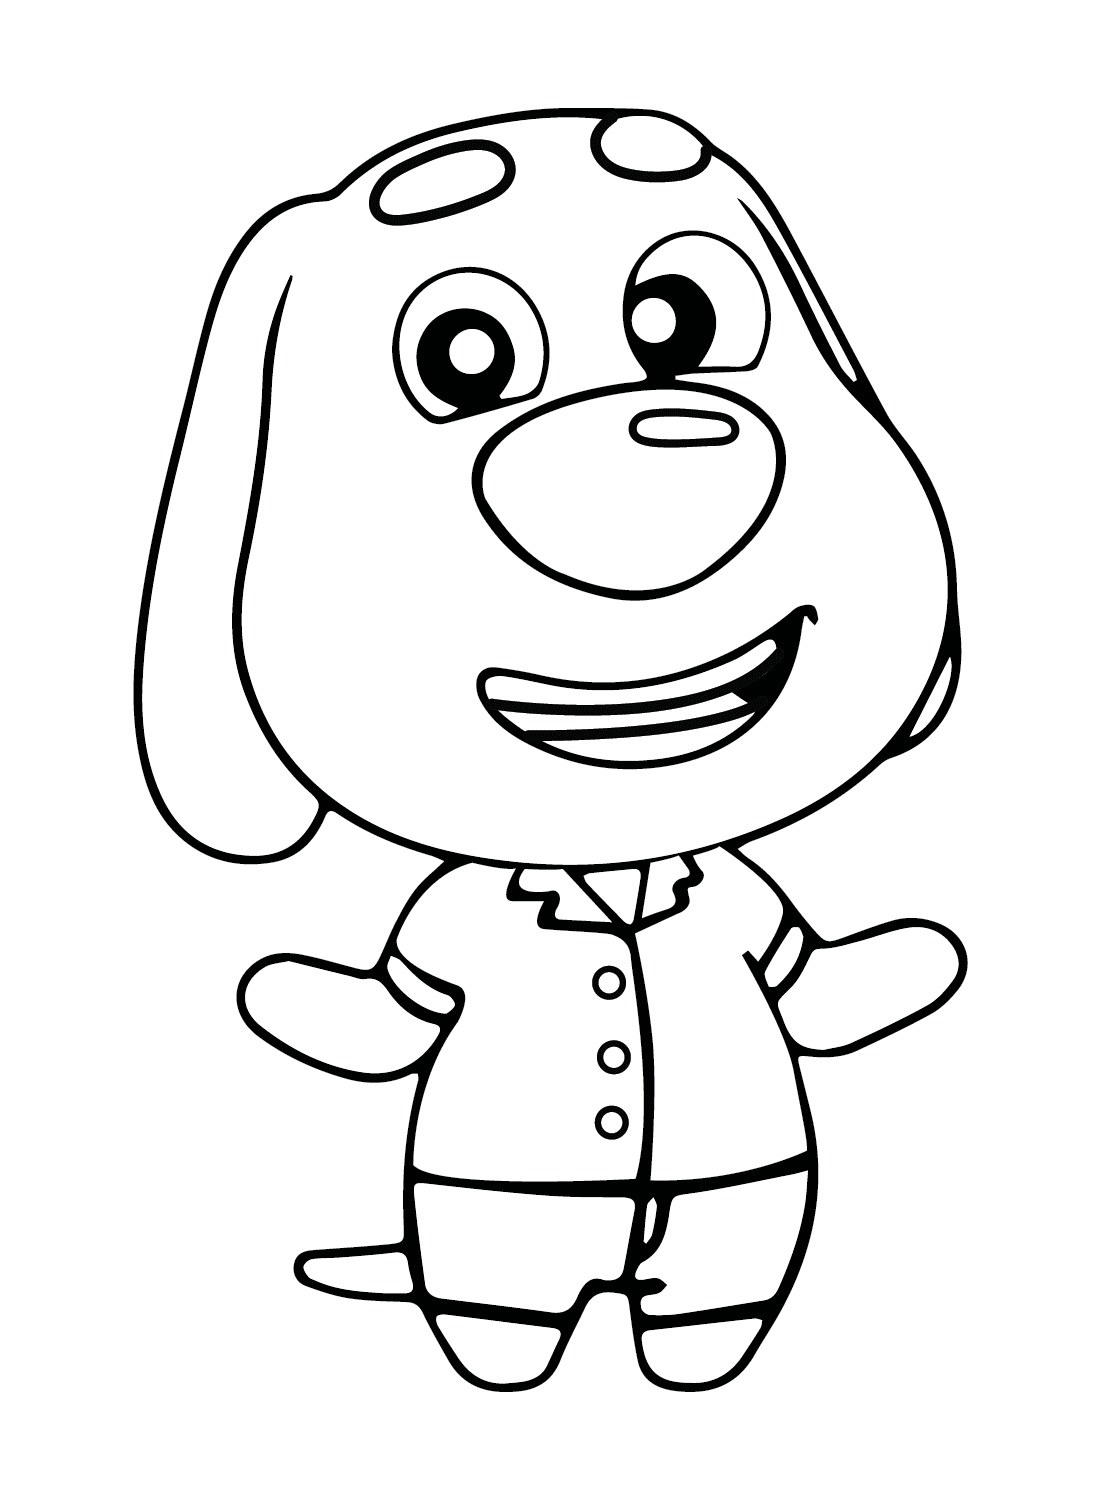 Talking Ben Cute Coloring Page